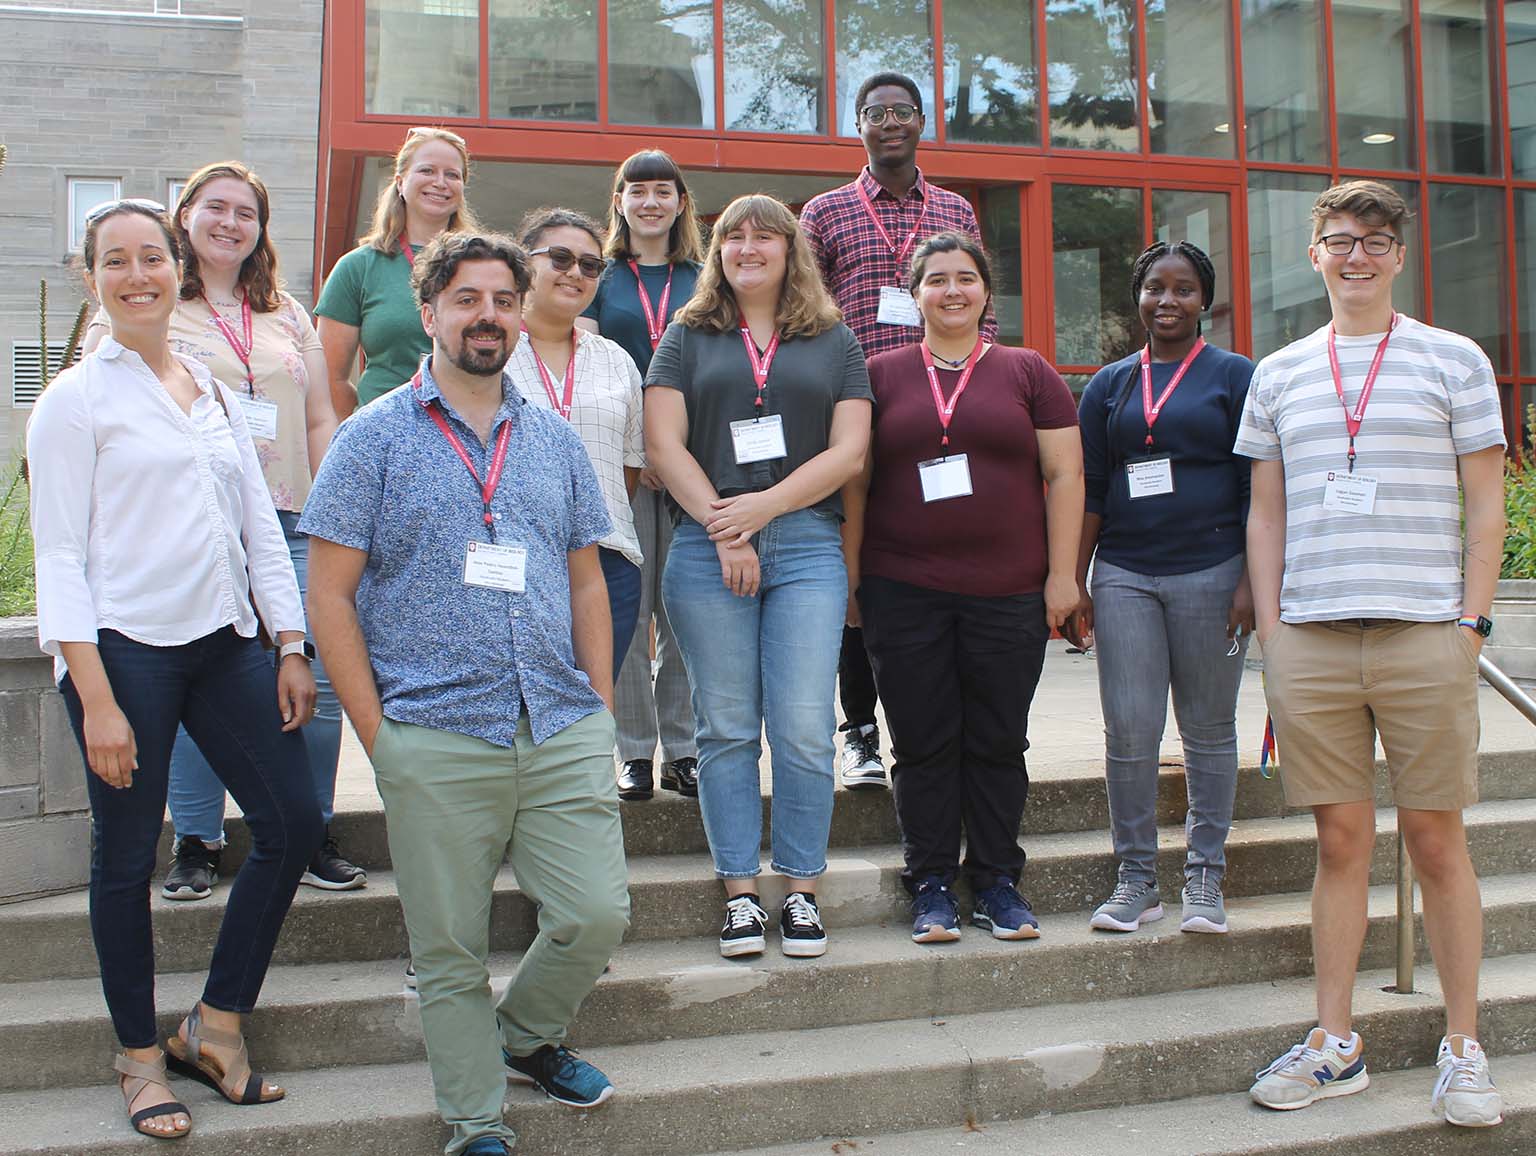 Logan Geyman (right) stands with nine other young women and men and Professor Irene Newton (left) on the steps outside of the Biology Building atrium while posing for a group photo of the incoming Microbiology graduate students during orientation.